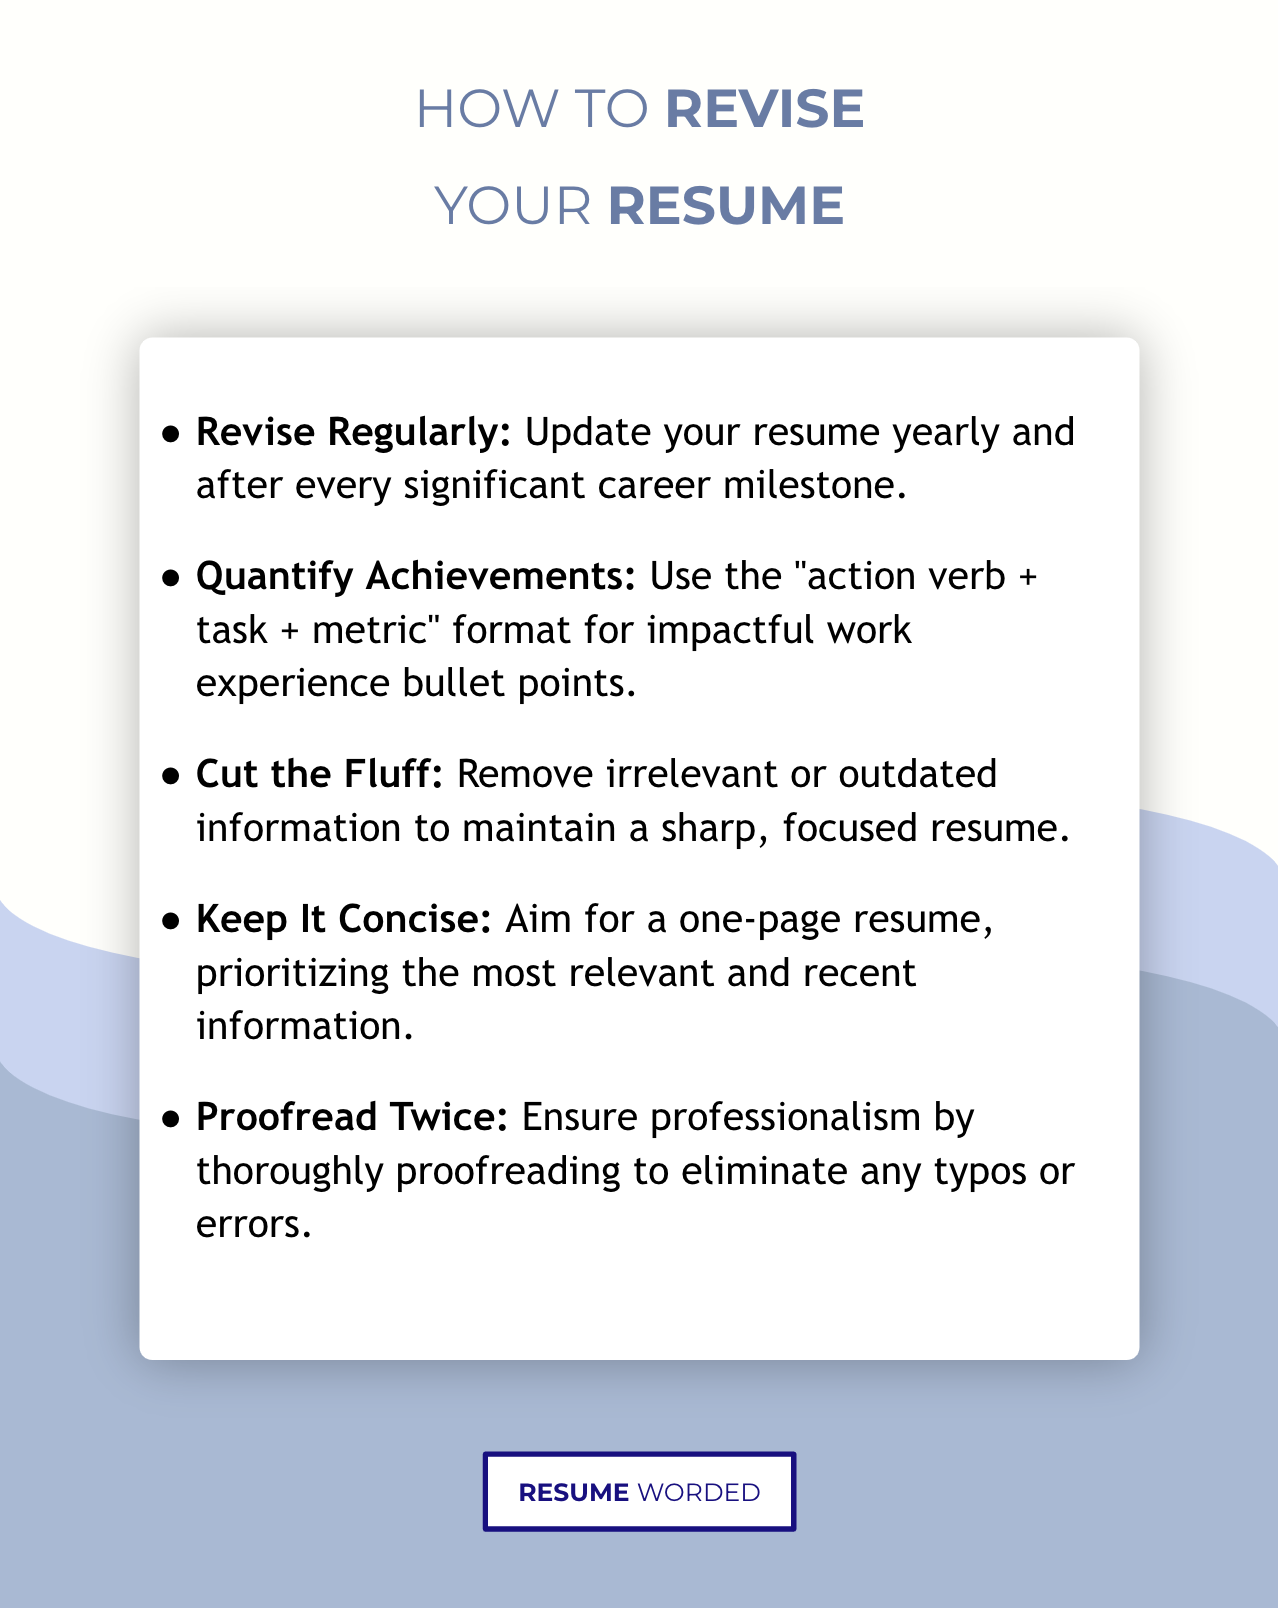 How to Revise a Resume